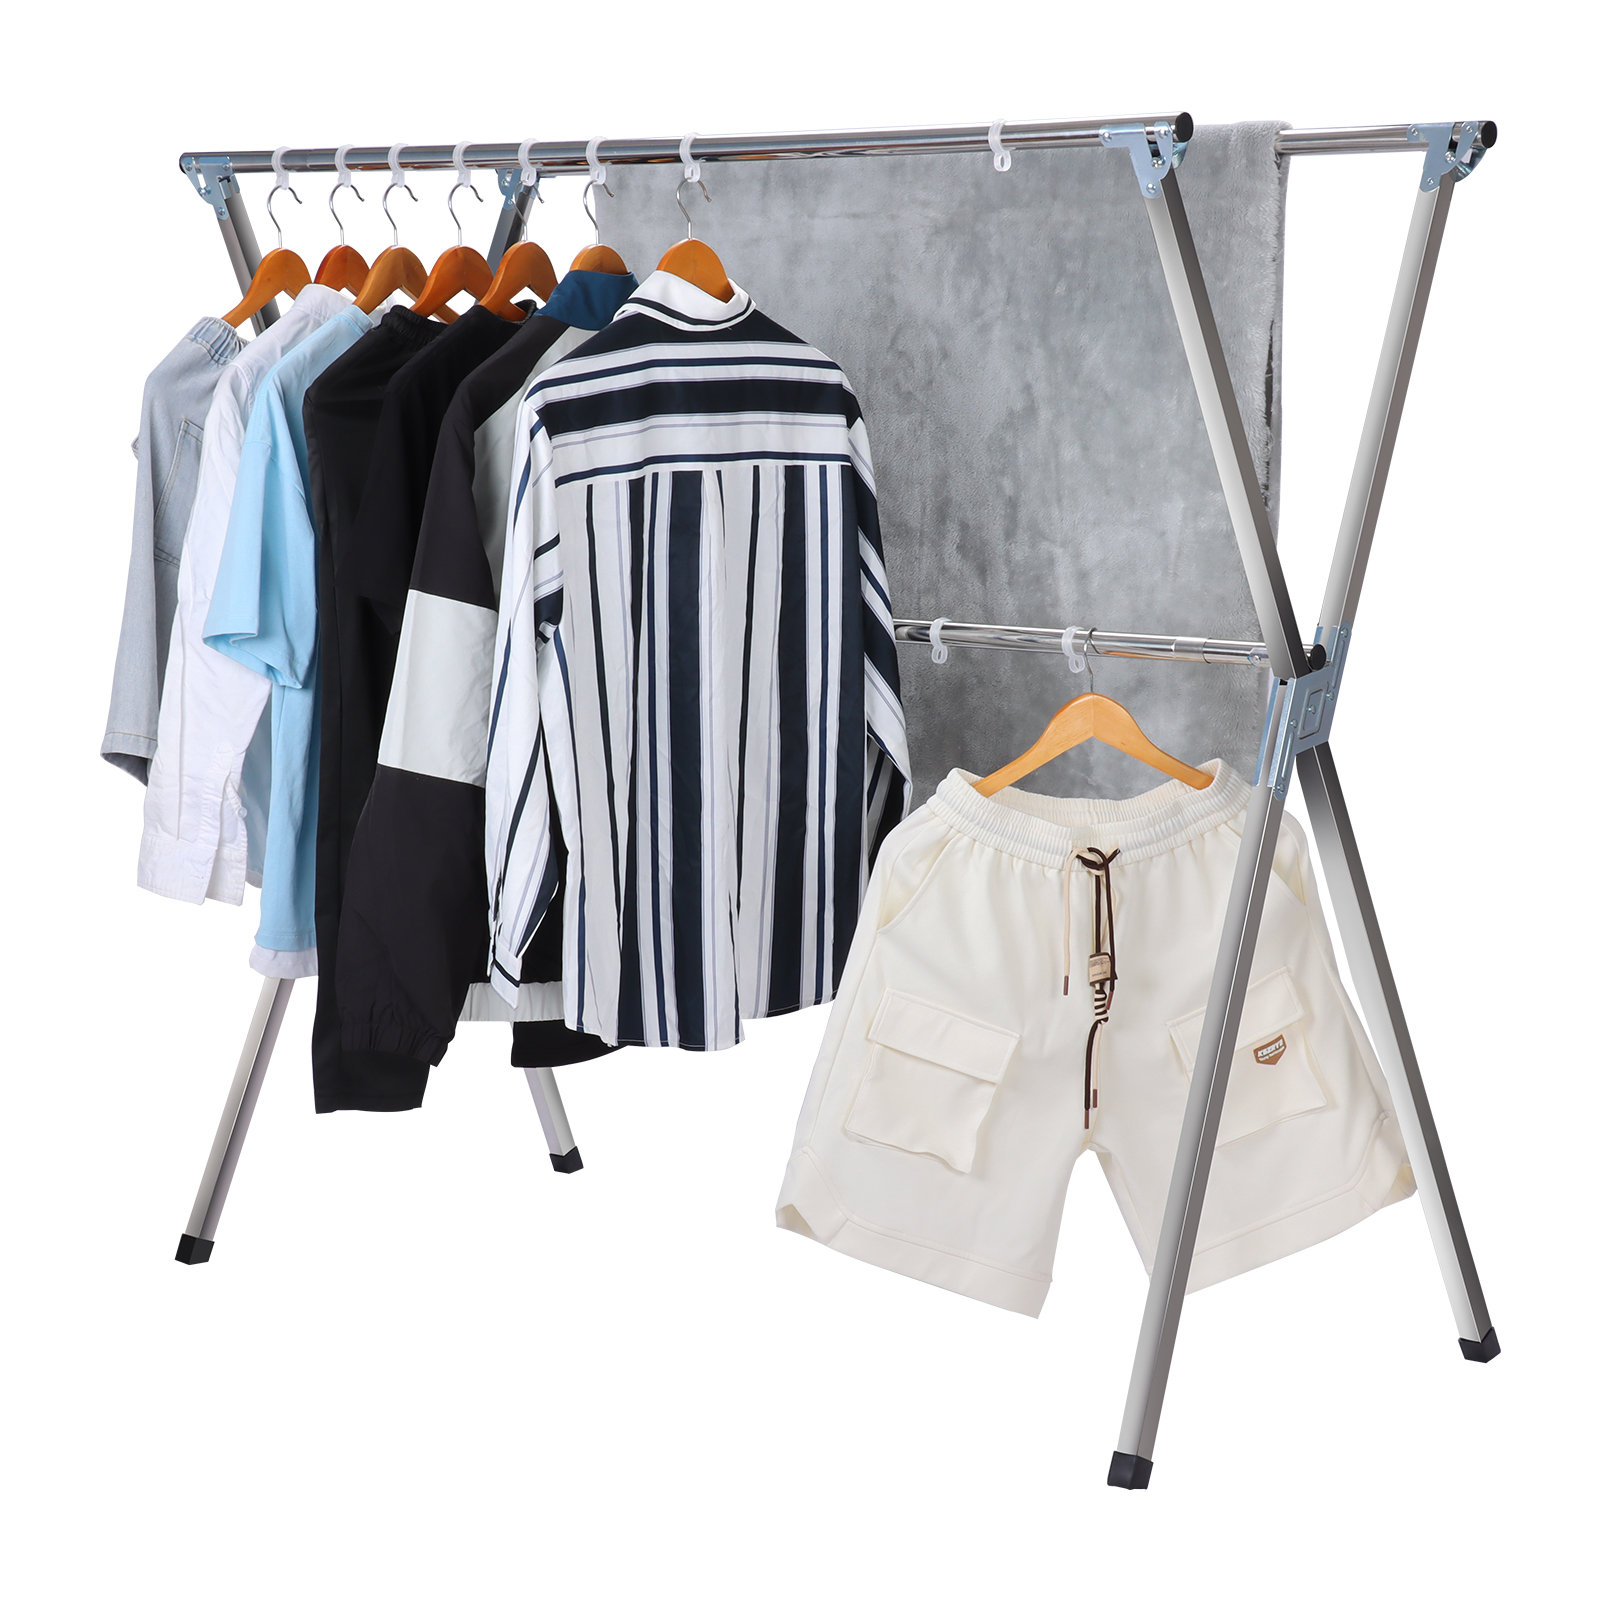 Rebrilliant Leaning Drying Rack & Reviews